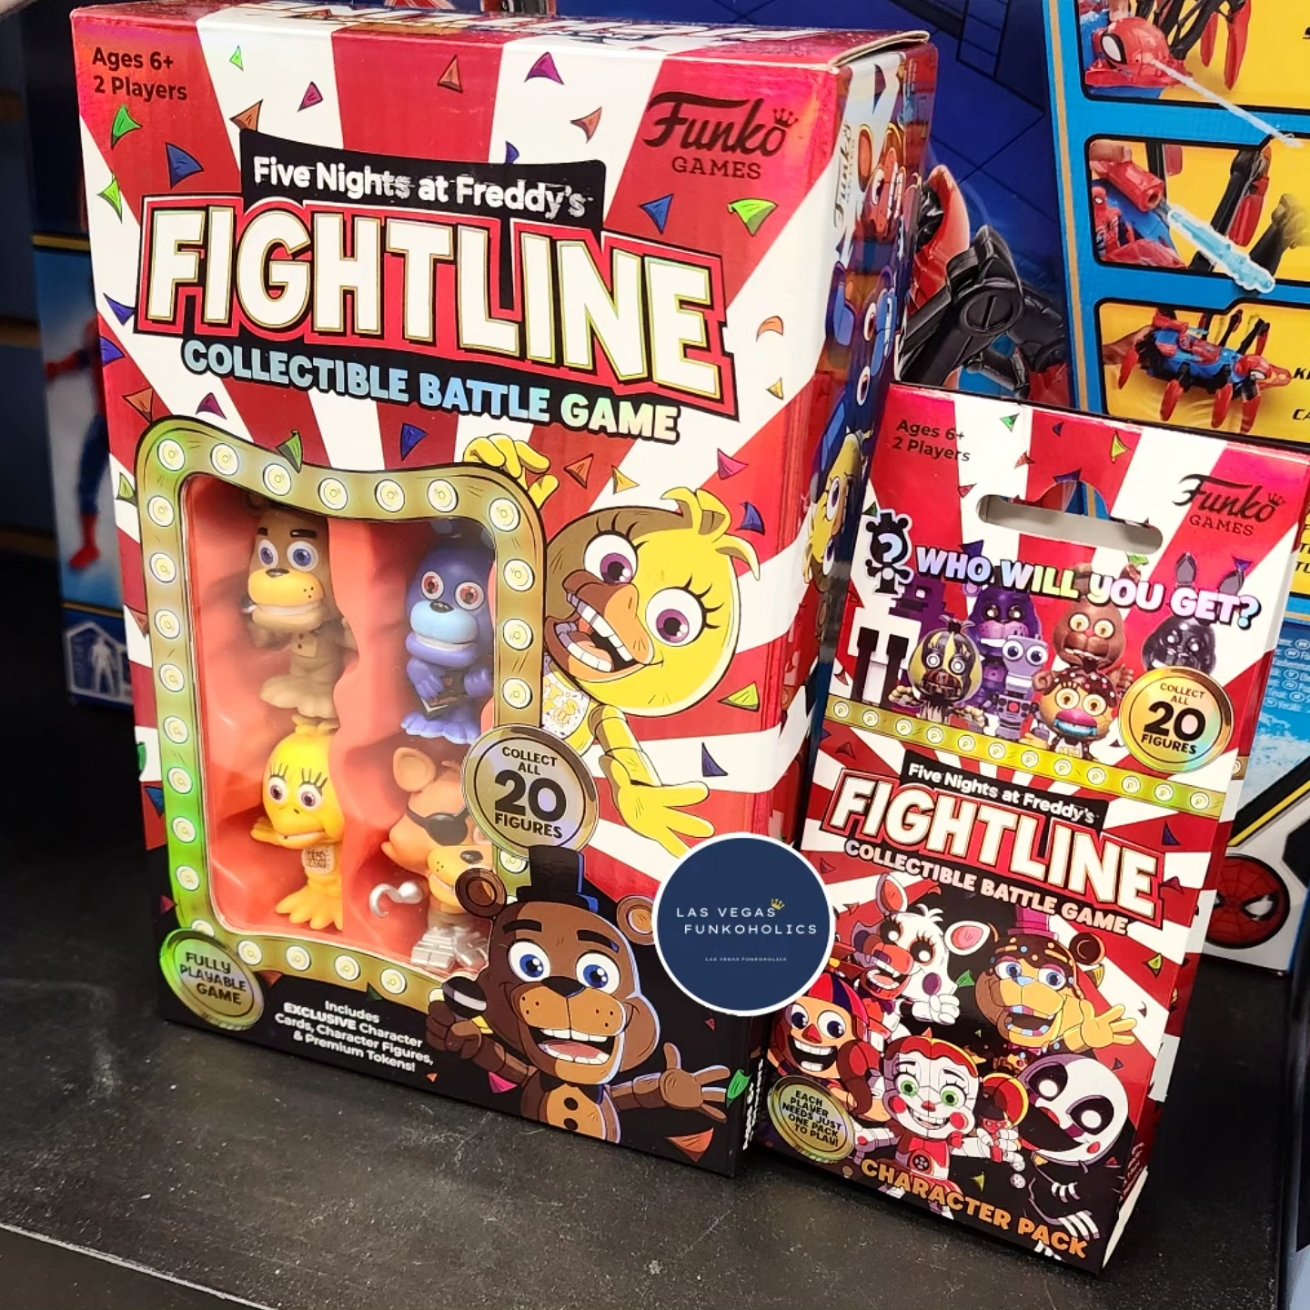 Funko Games Five Nights at Freddy's FightLine Collectible Battle